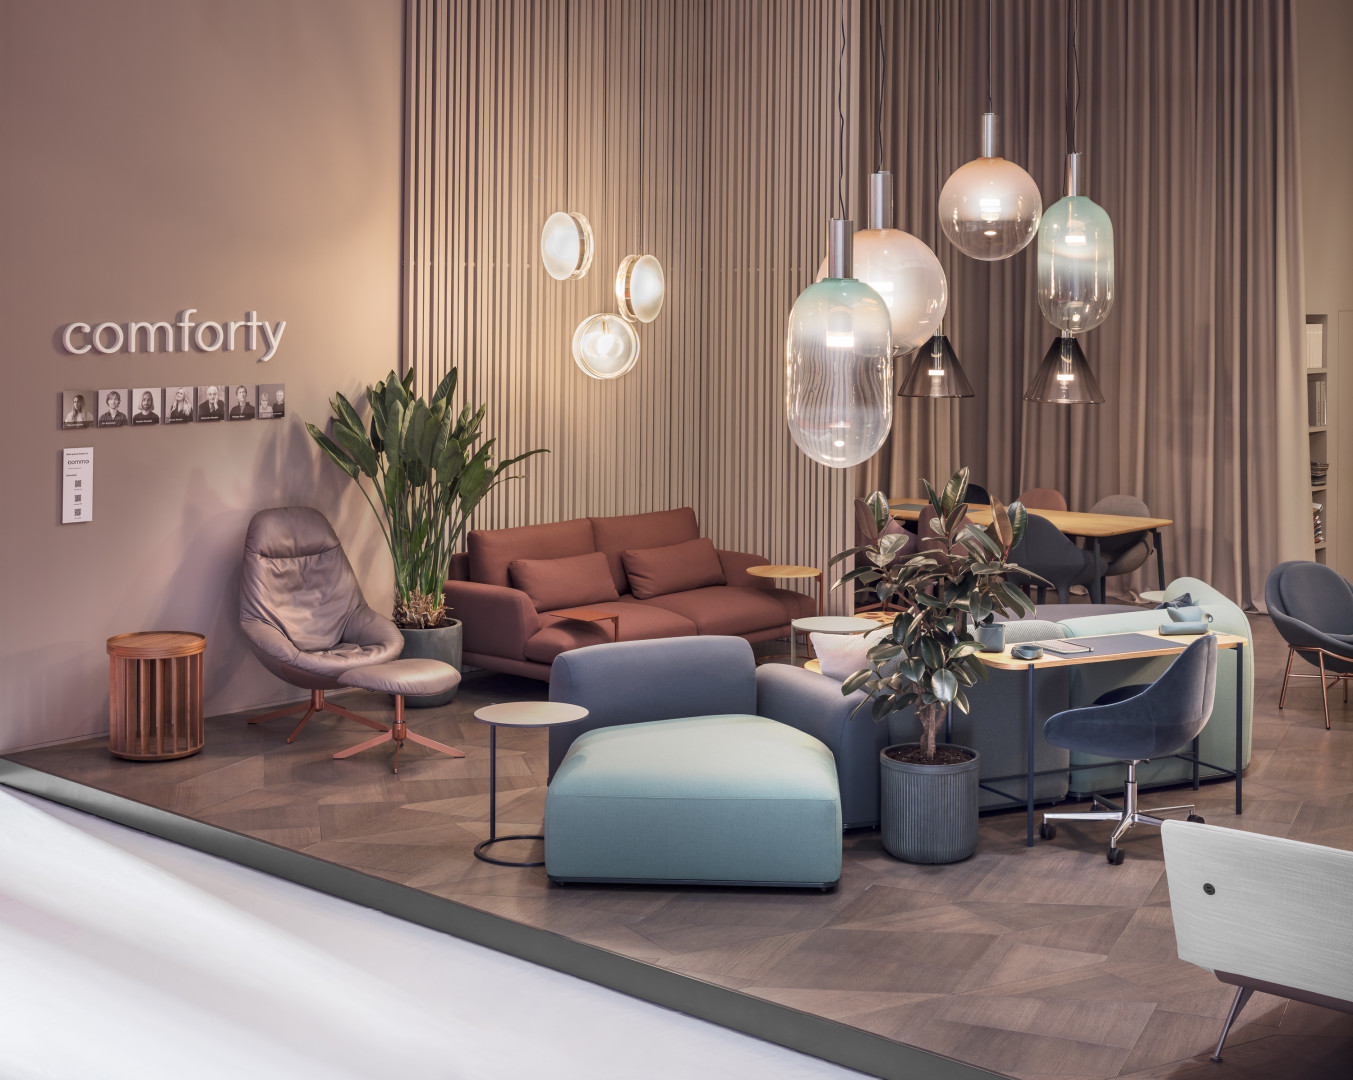 Comforty na Salone del Mobile 2019. Fot. Ernest Wińczyk